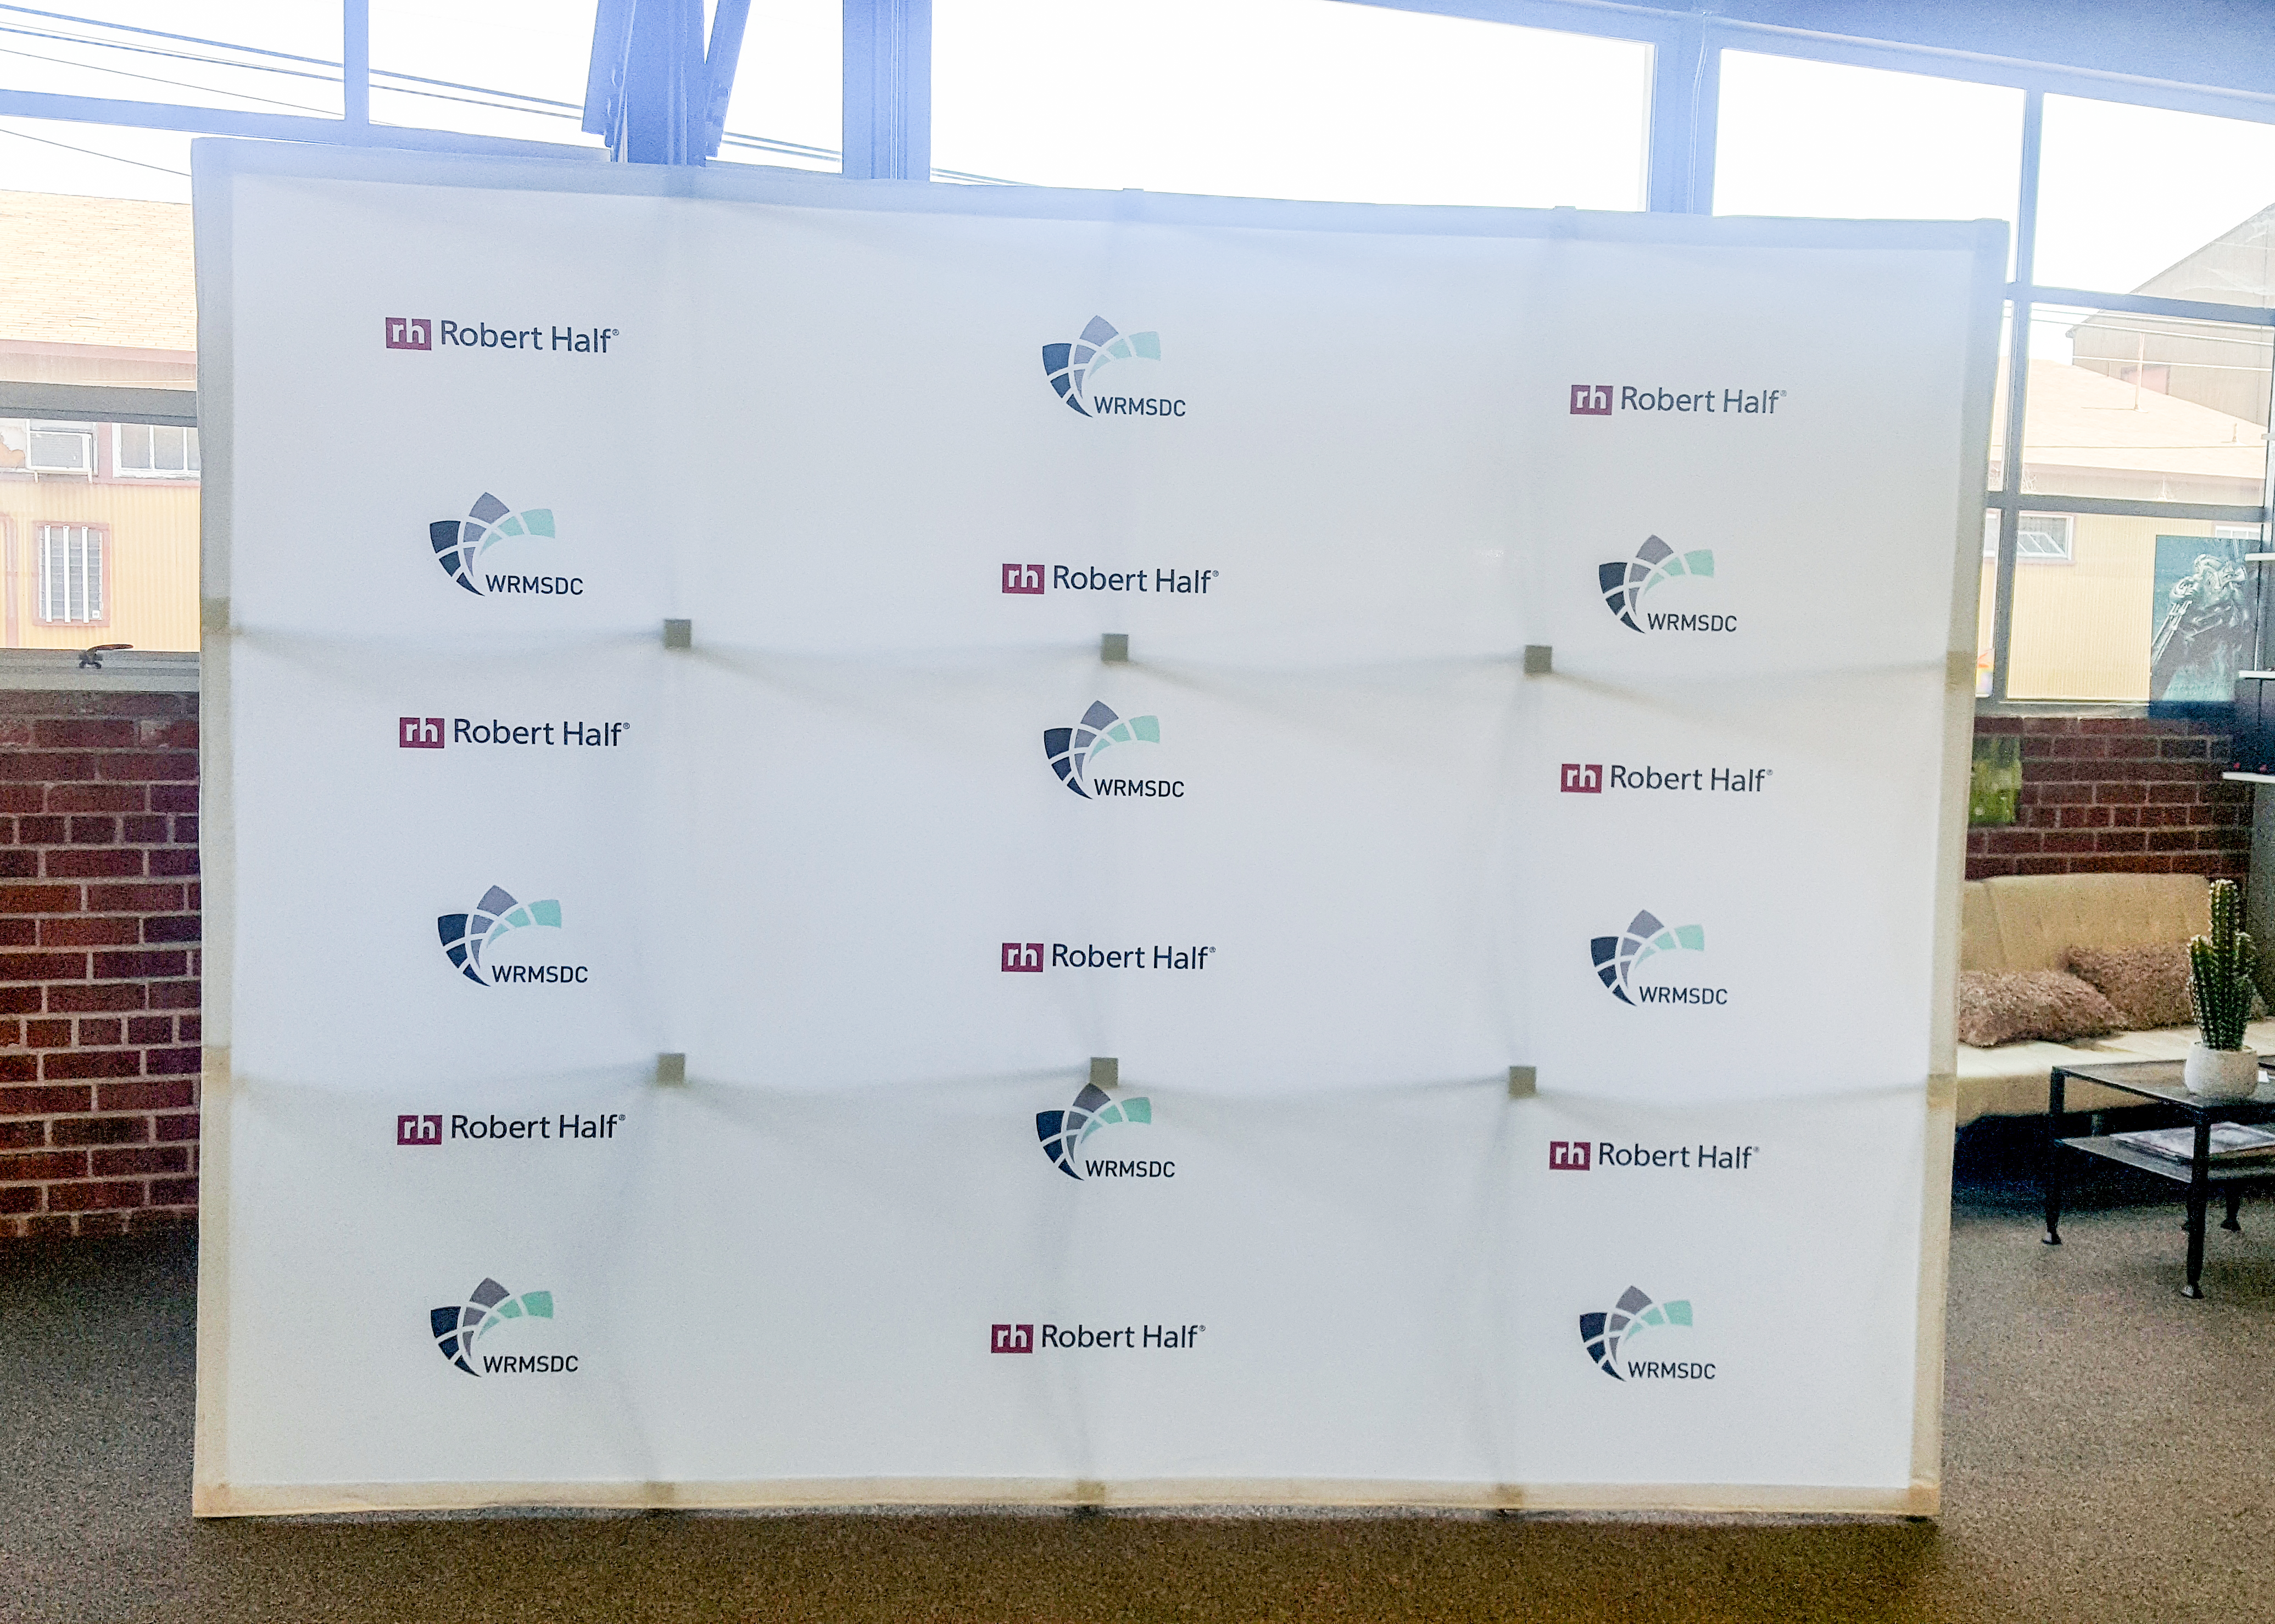 Robert Half and WRMSDC step and repeat banner